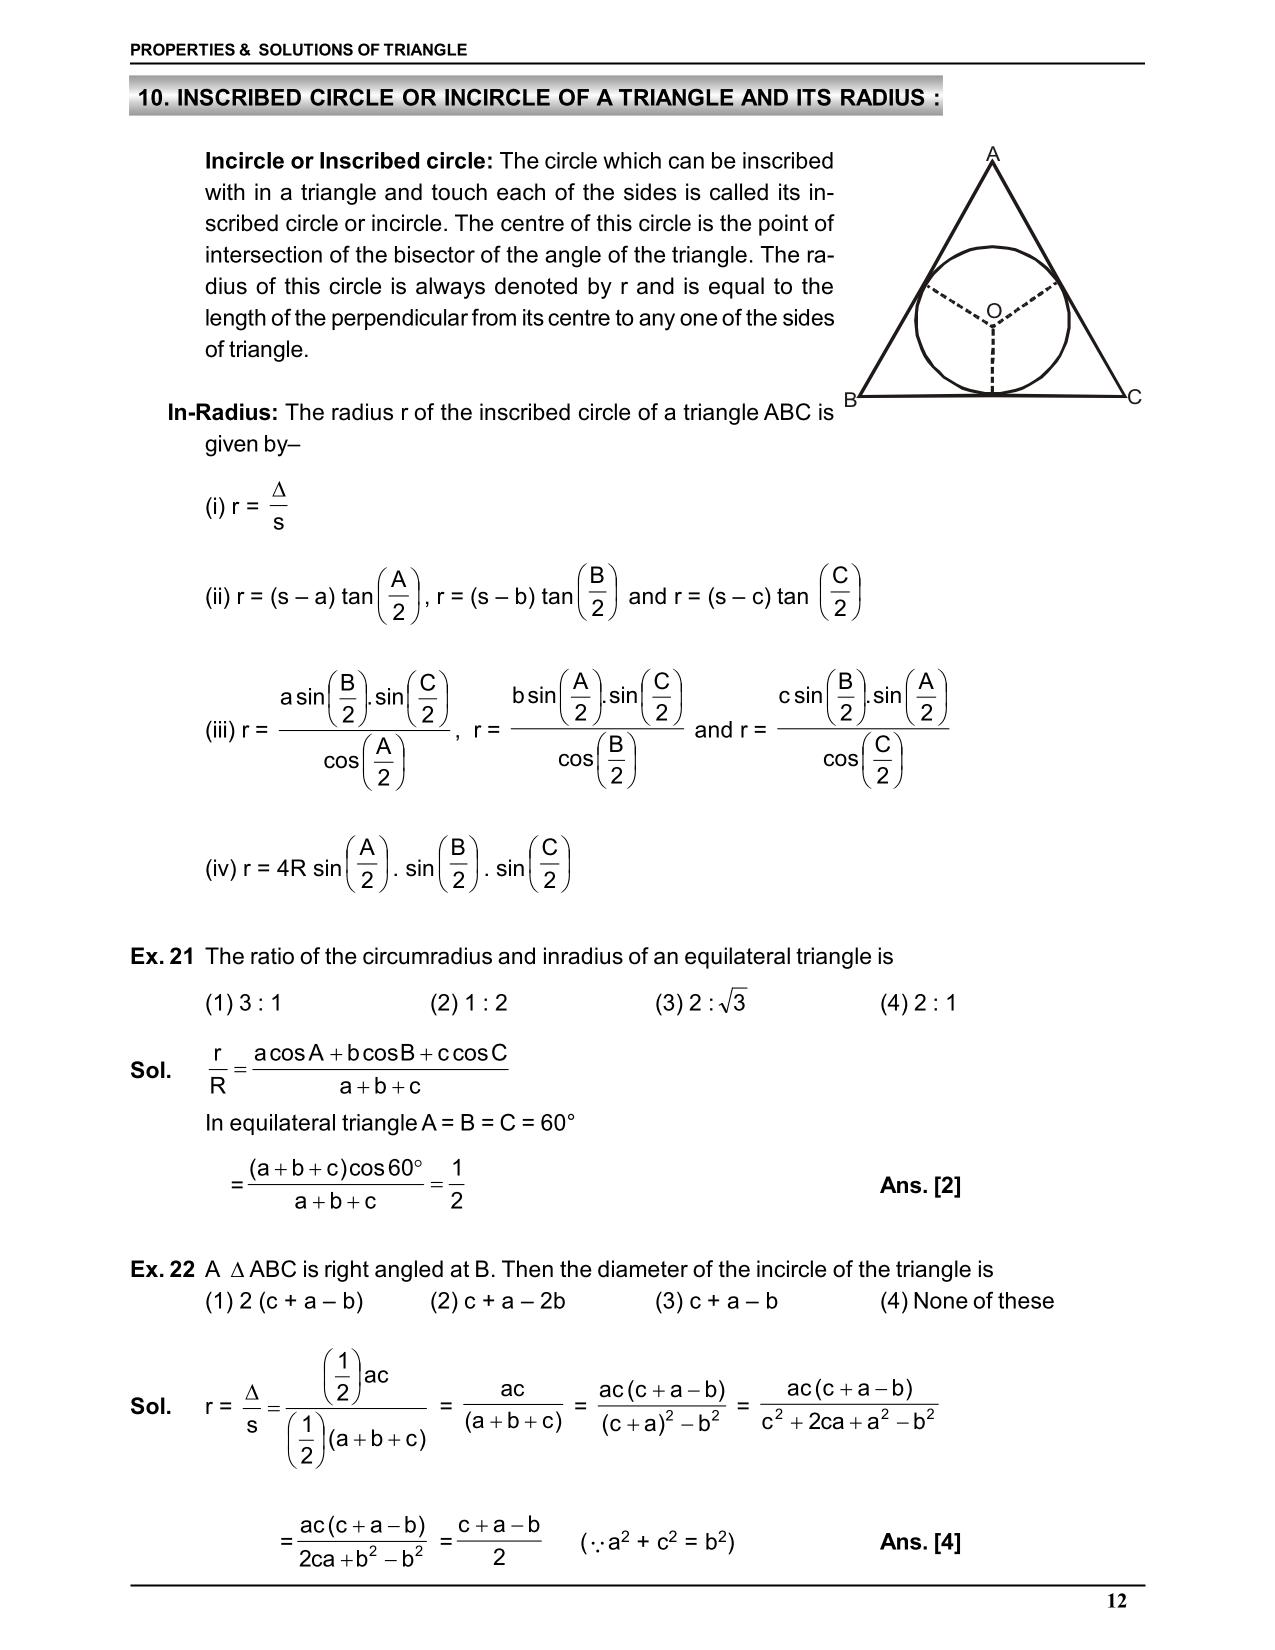 Properties and Solution of Triangle